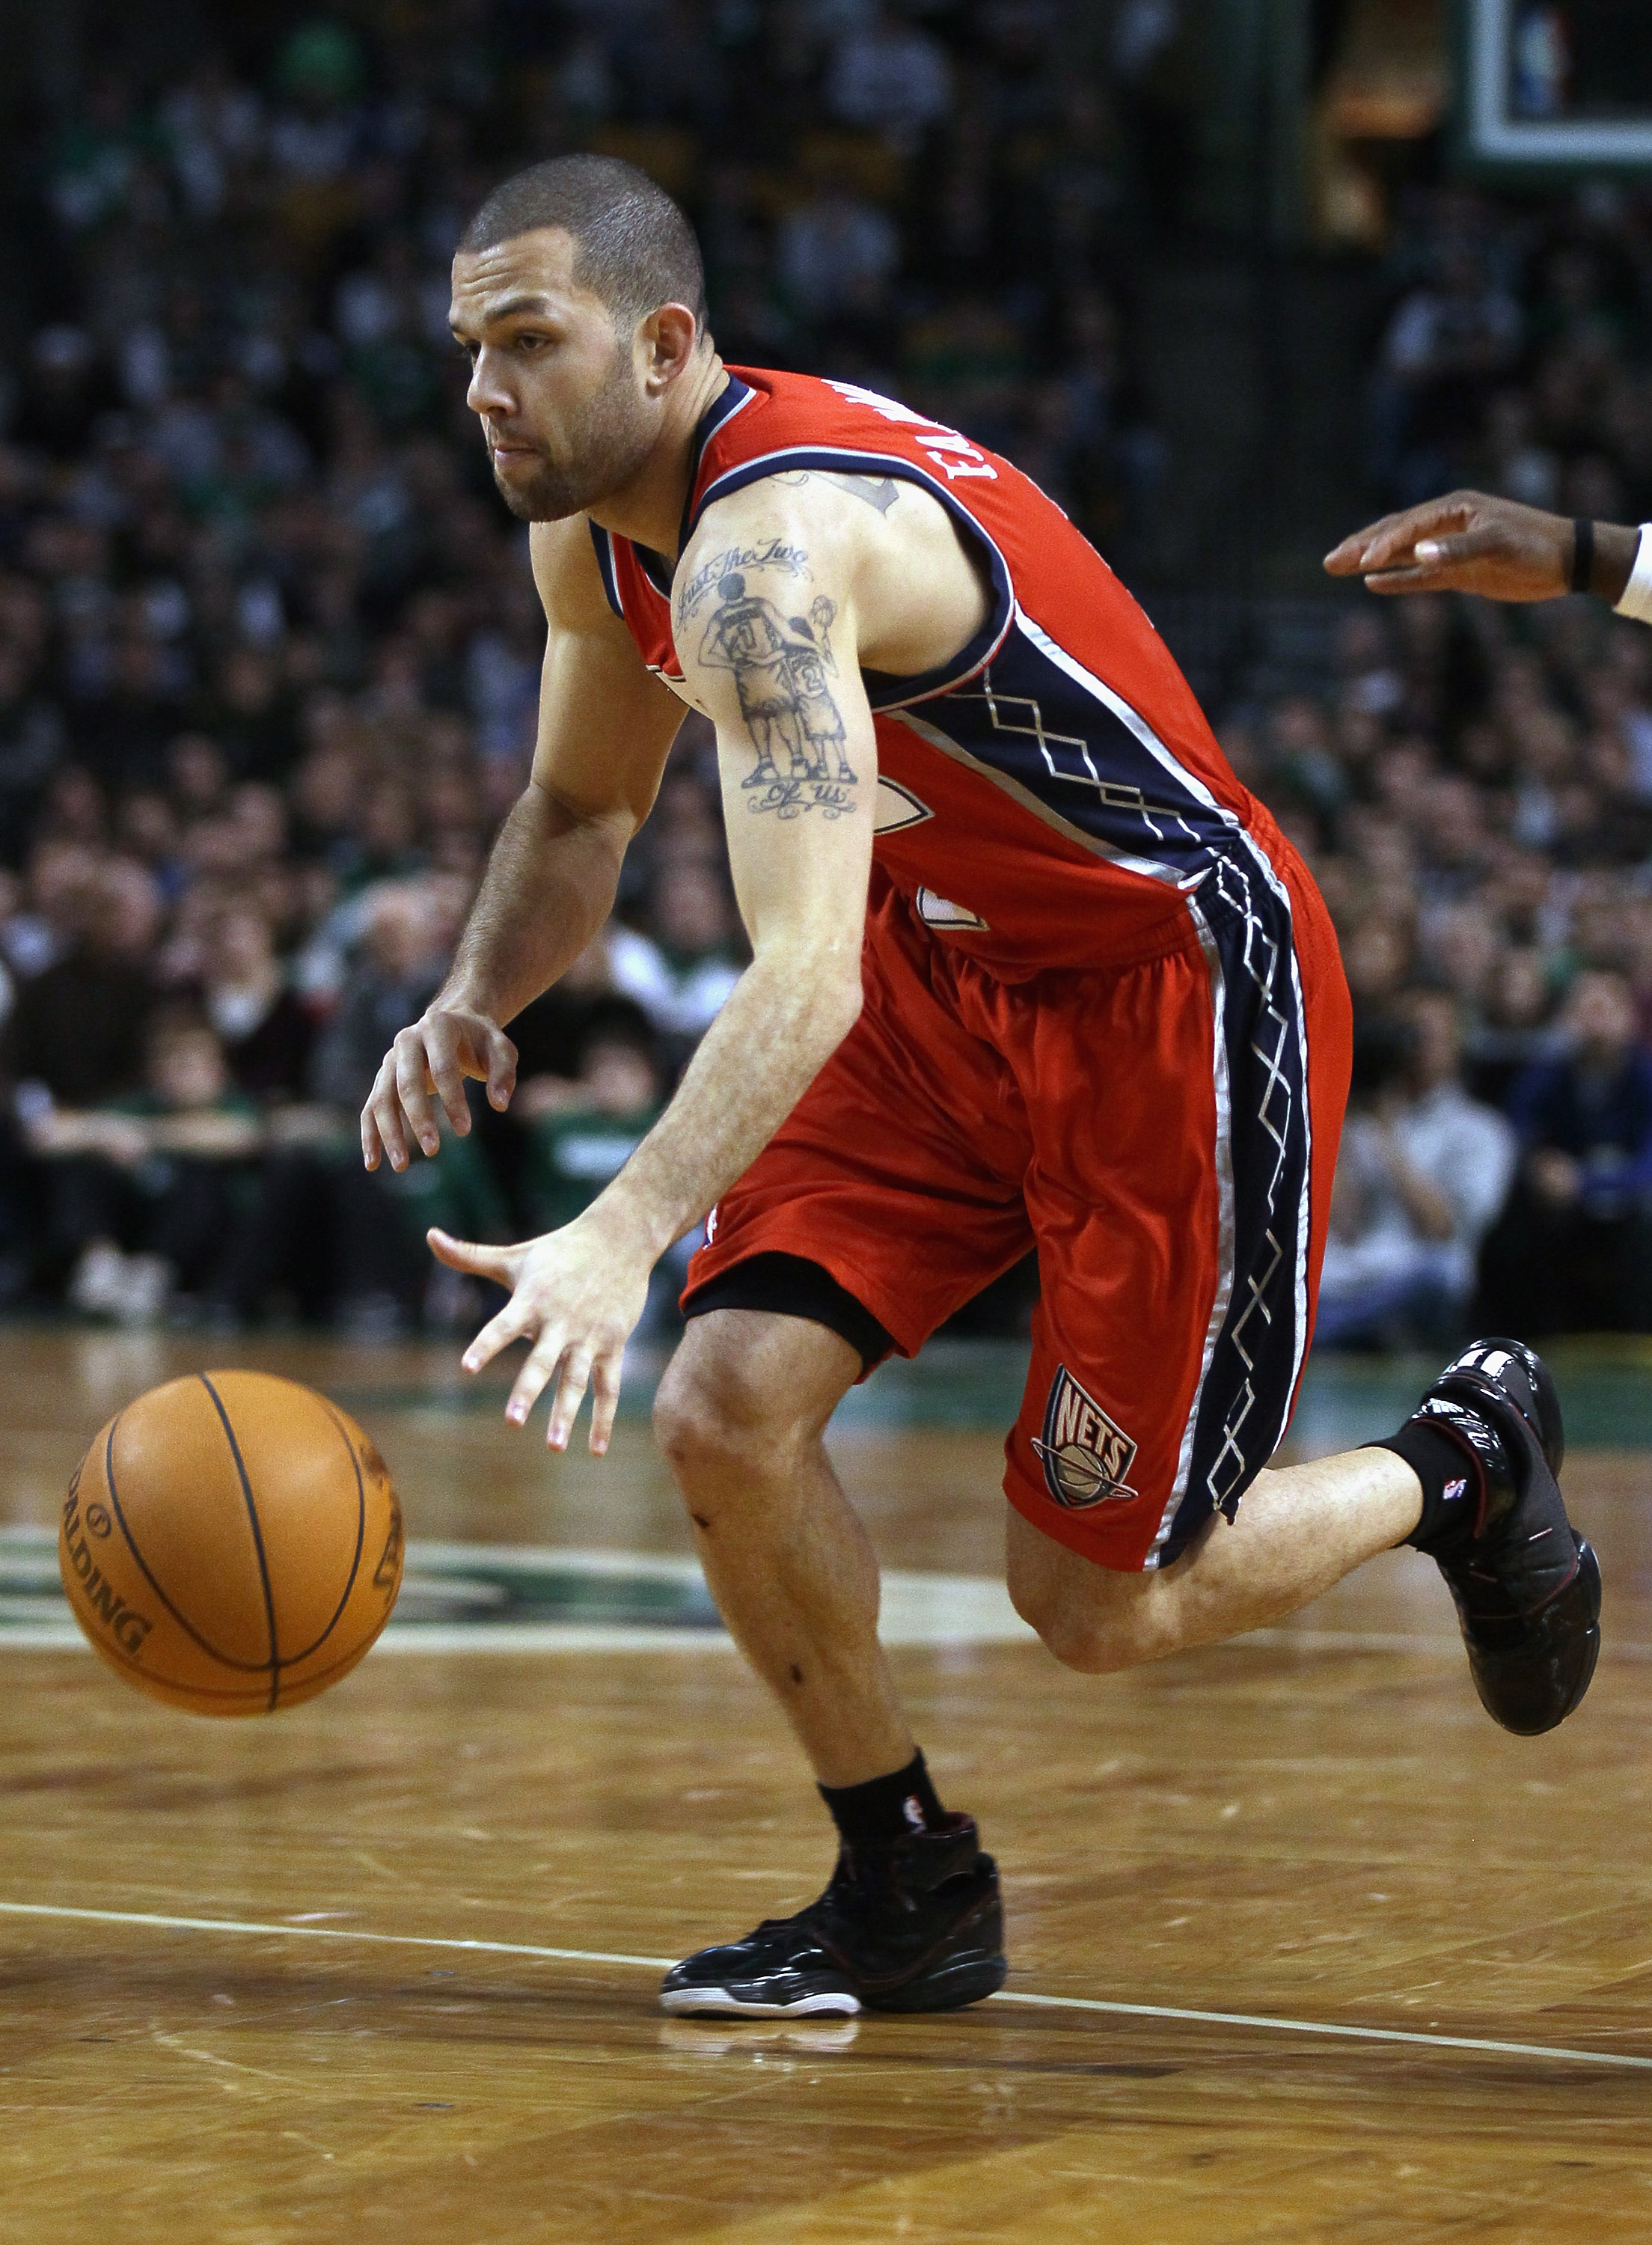 BOSTON - NOVEMBER 24:  Jordan Farmar #2 of the New Jersey Nets drives to the net in the second half against the Boston Celtics on November 24, 2010 at the TD Garden in Boston, Massachusetts. The Celtics defeated the nets 89-83. NOTE TO USER: User expressl